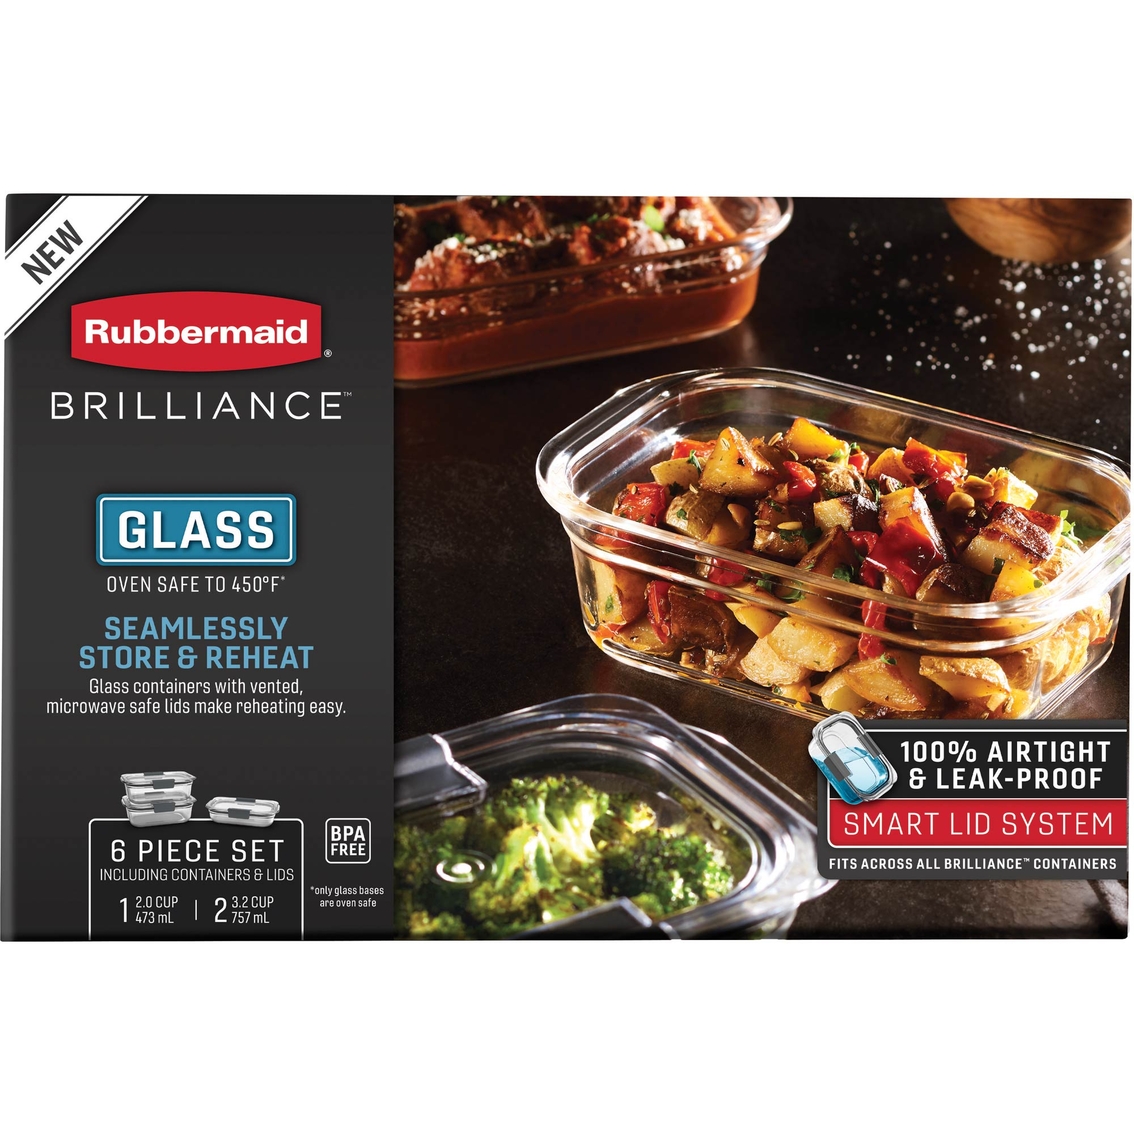 Rubbermaid Brilliance Glass Containers 6 pc. Set - Image 2 of 2